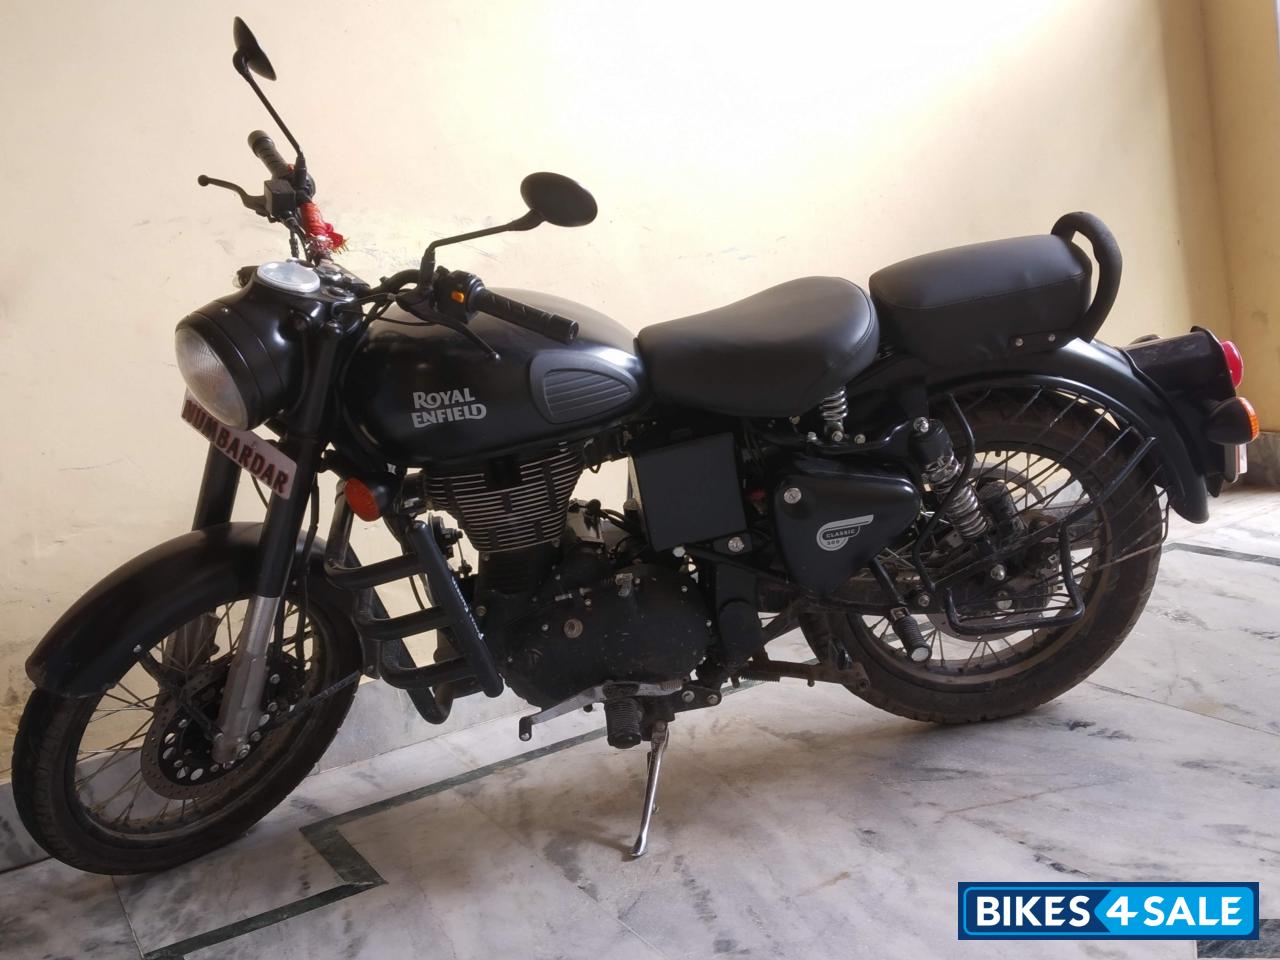 Stealth Black Royal Enfield Classic 500